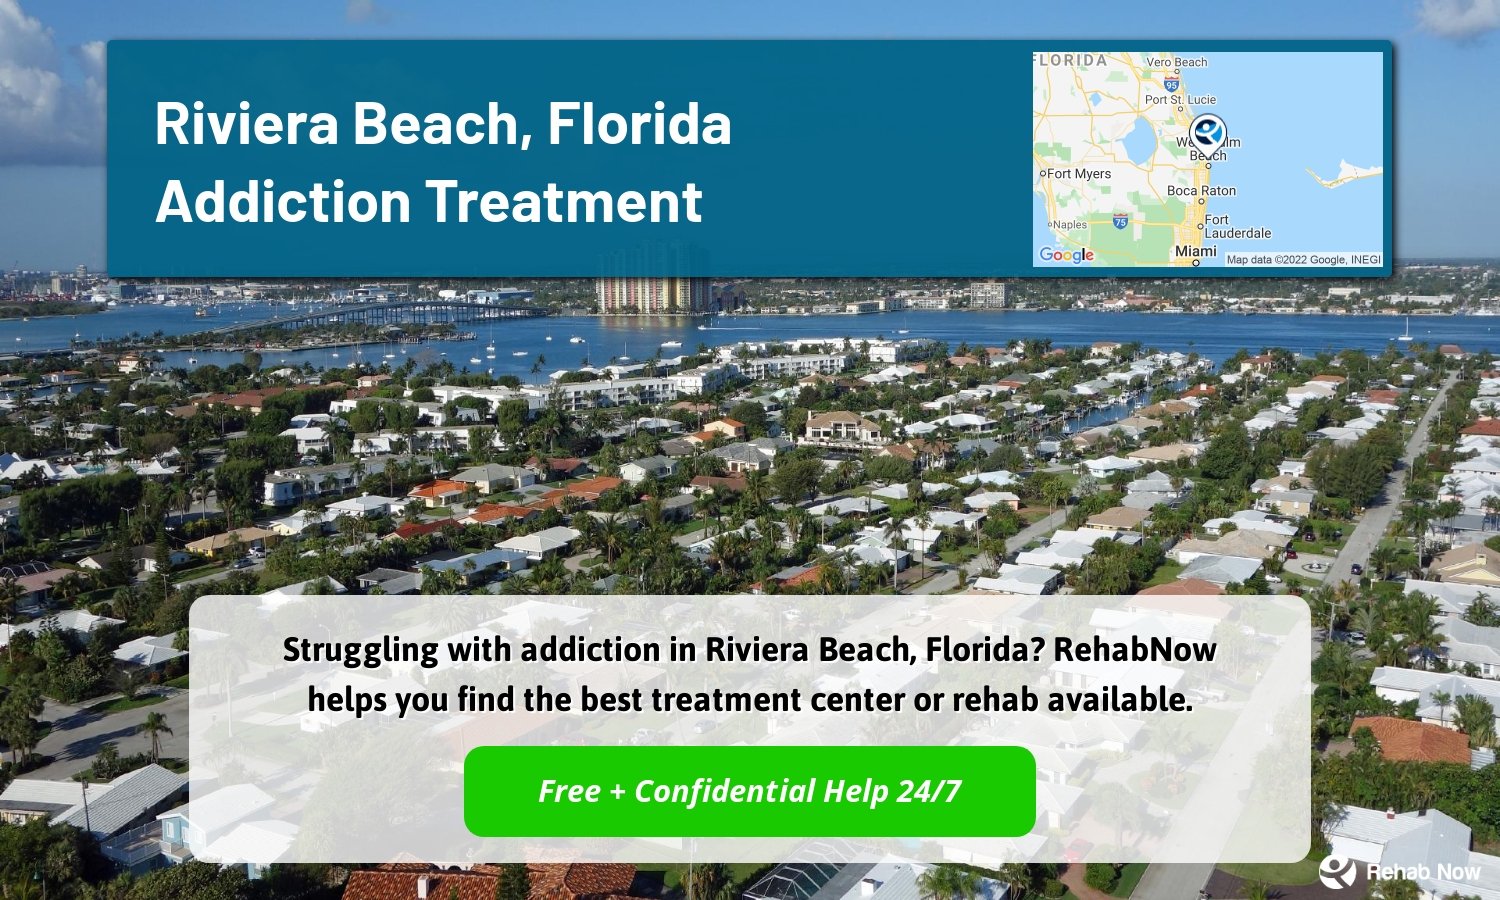 Struggling with addiction in Riviera Beach, Florida? RehabNow helps you find the best treatment center or rehab available.